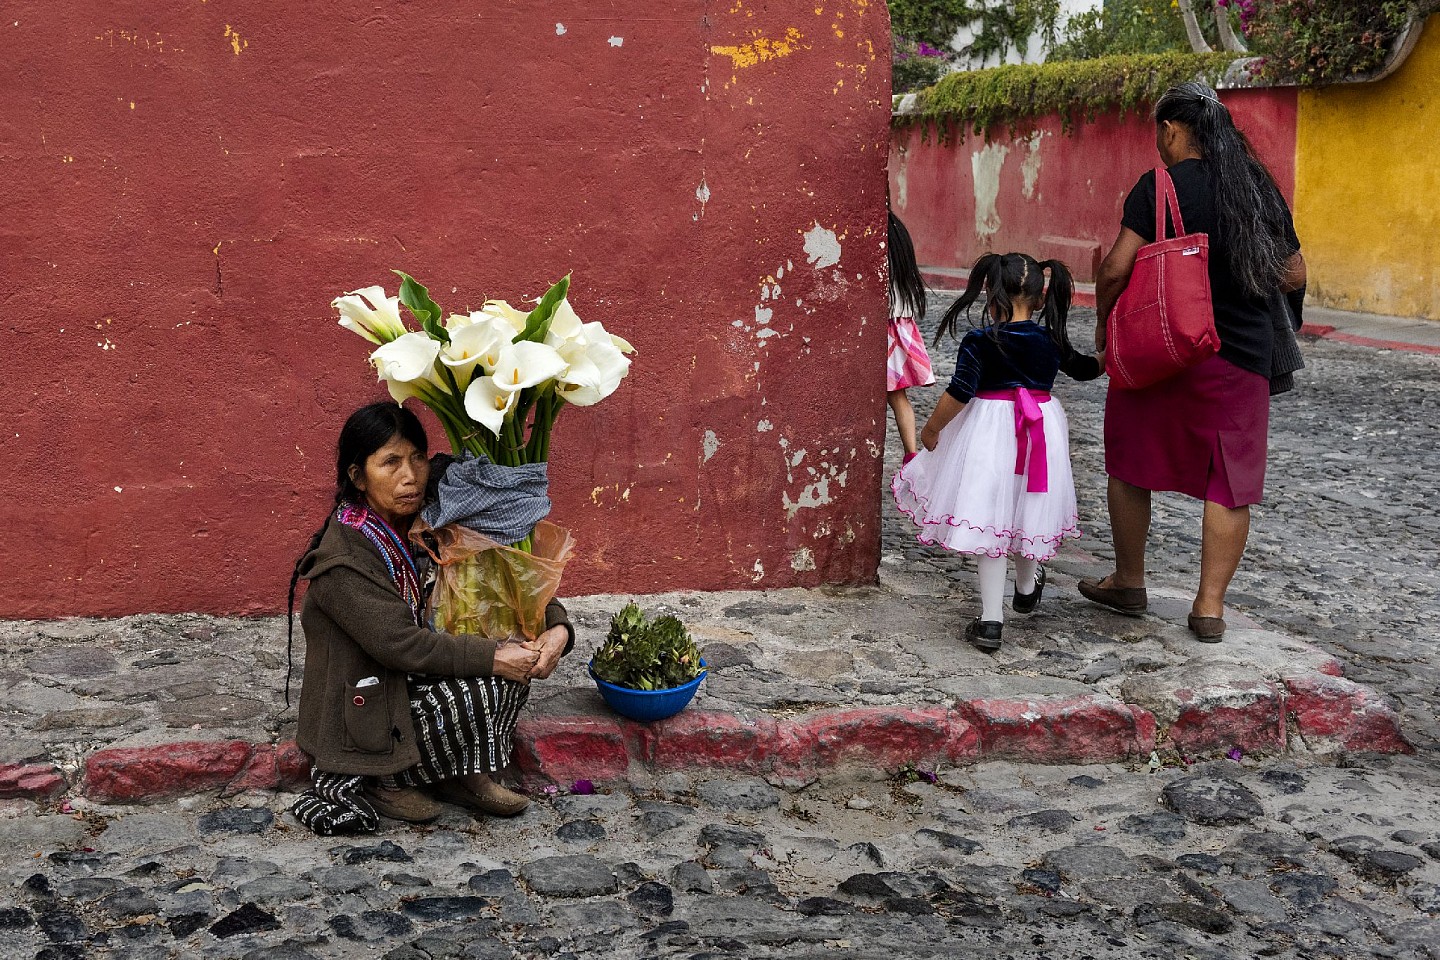 Steve McCurry, Flower Vendor in Antigua, 2017
FujiFlex Crystal Archive Print
Price/Size on request